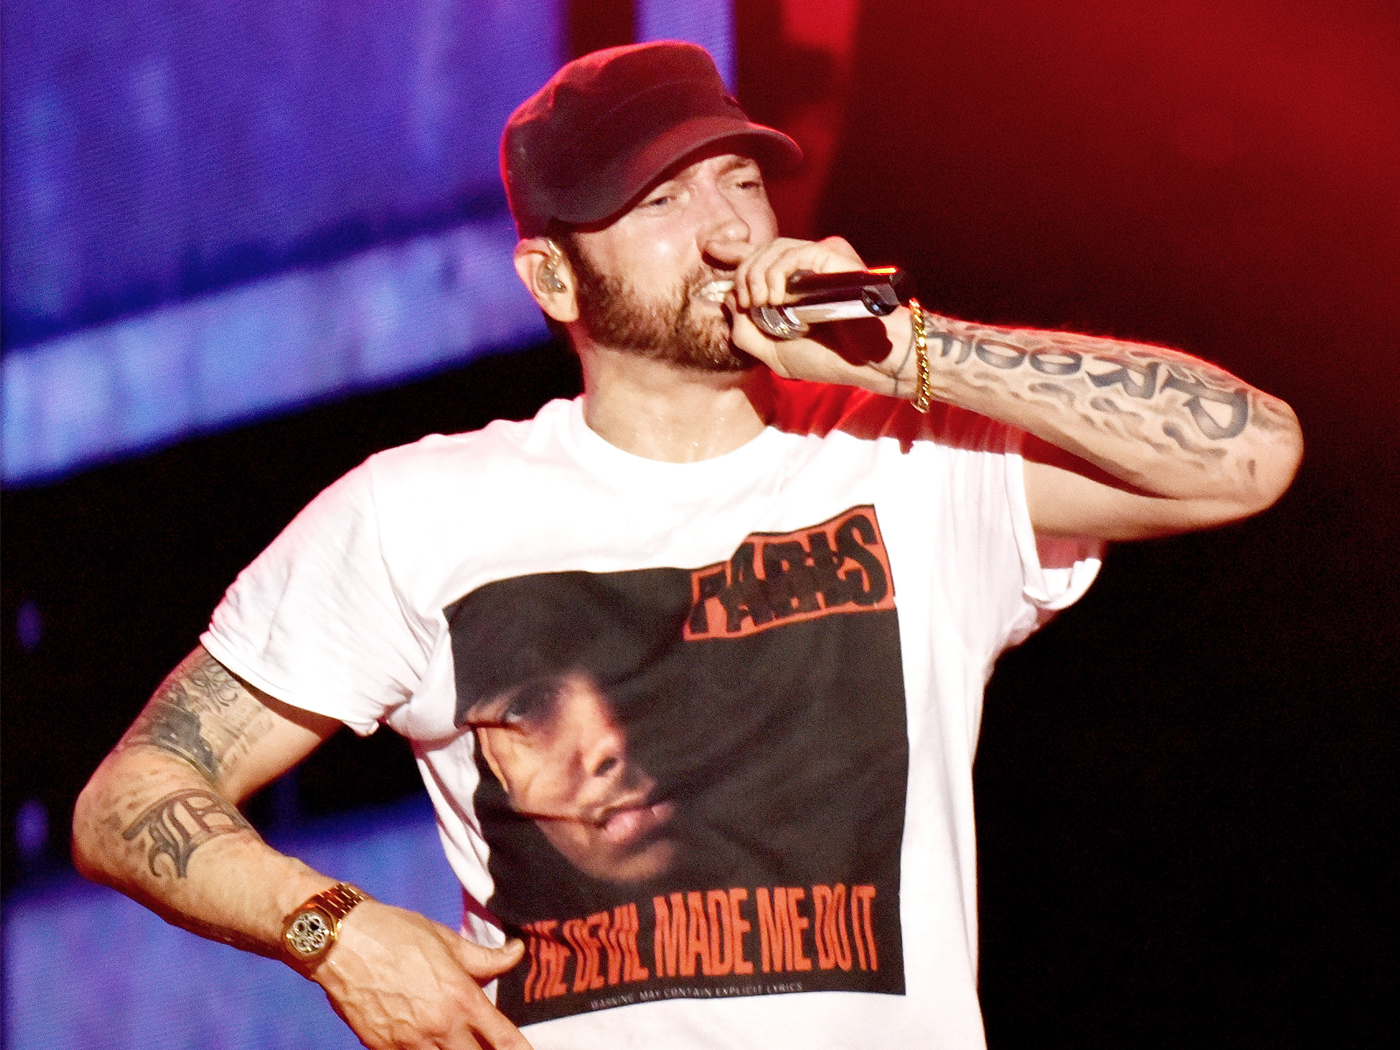 Eminem releases surprise album, 'Music To Be Murdered By'